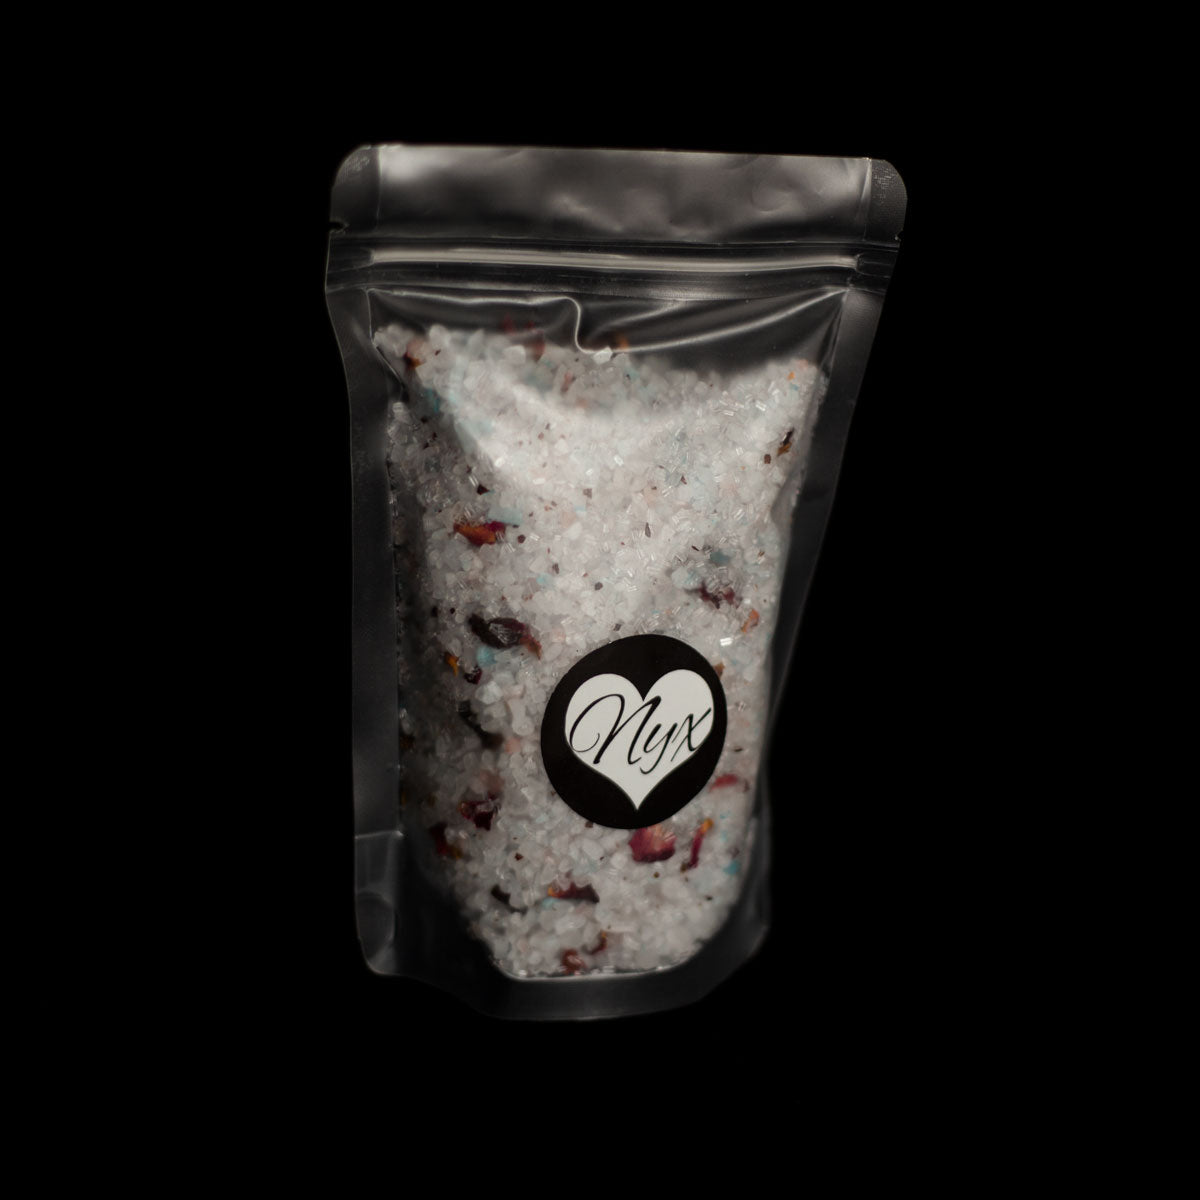 A clear/frosted bag filled with purple bath salts with botanicals